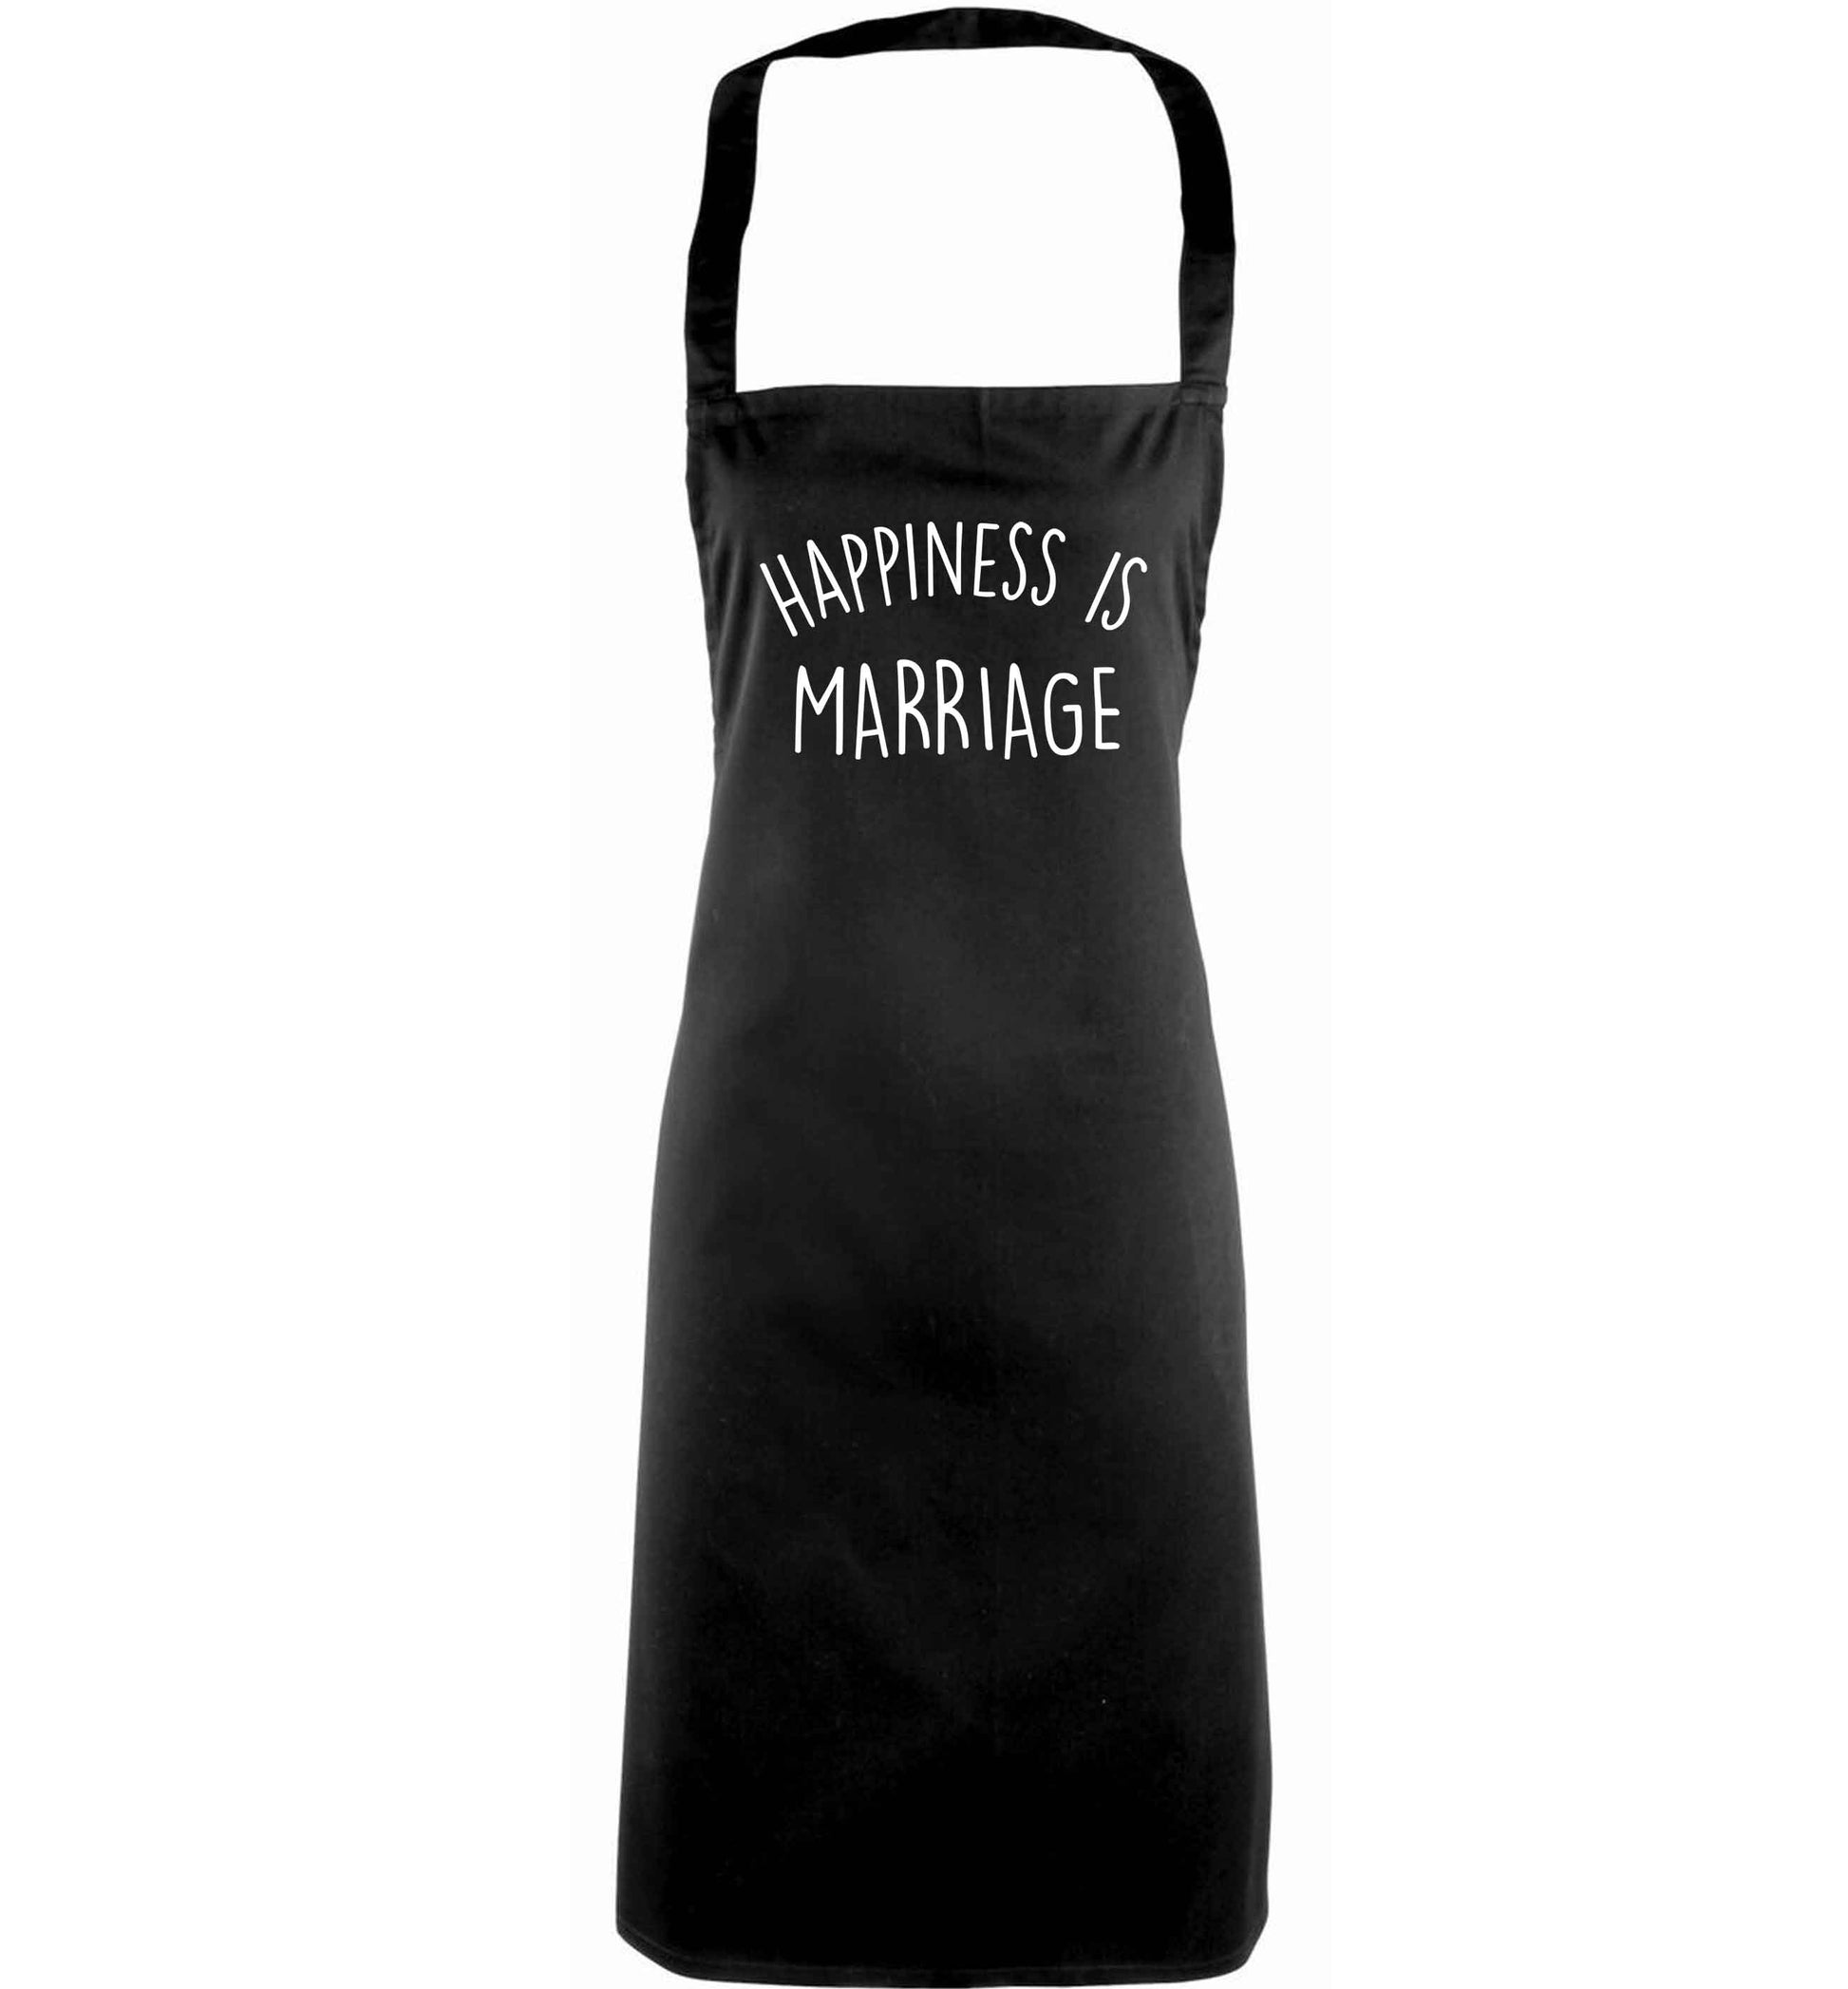 Happiness is marriage adults black apron